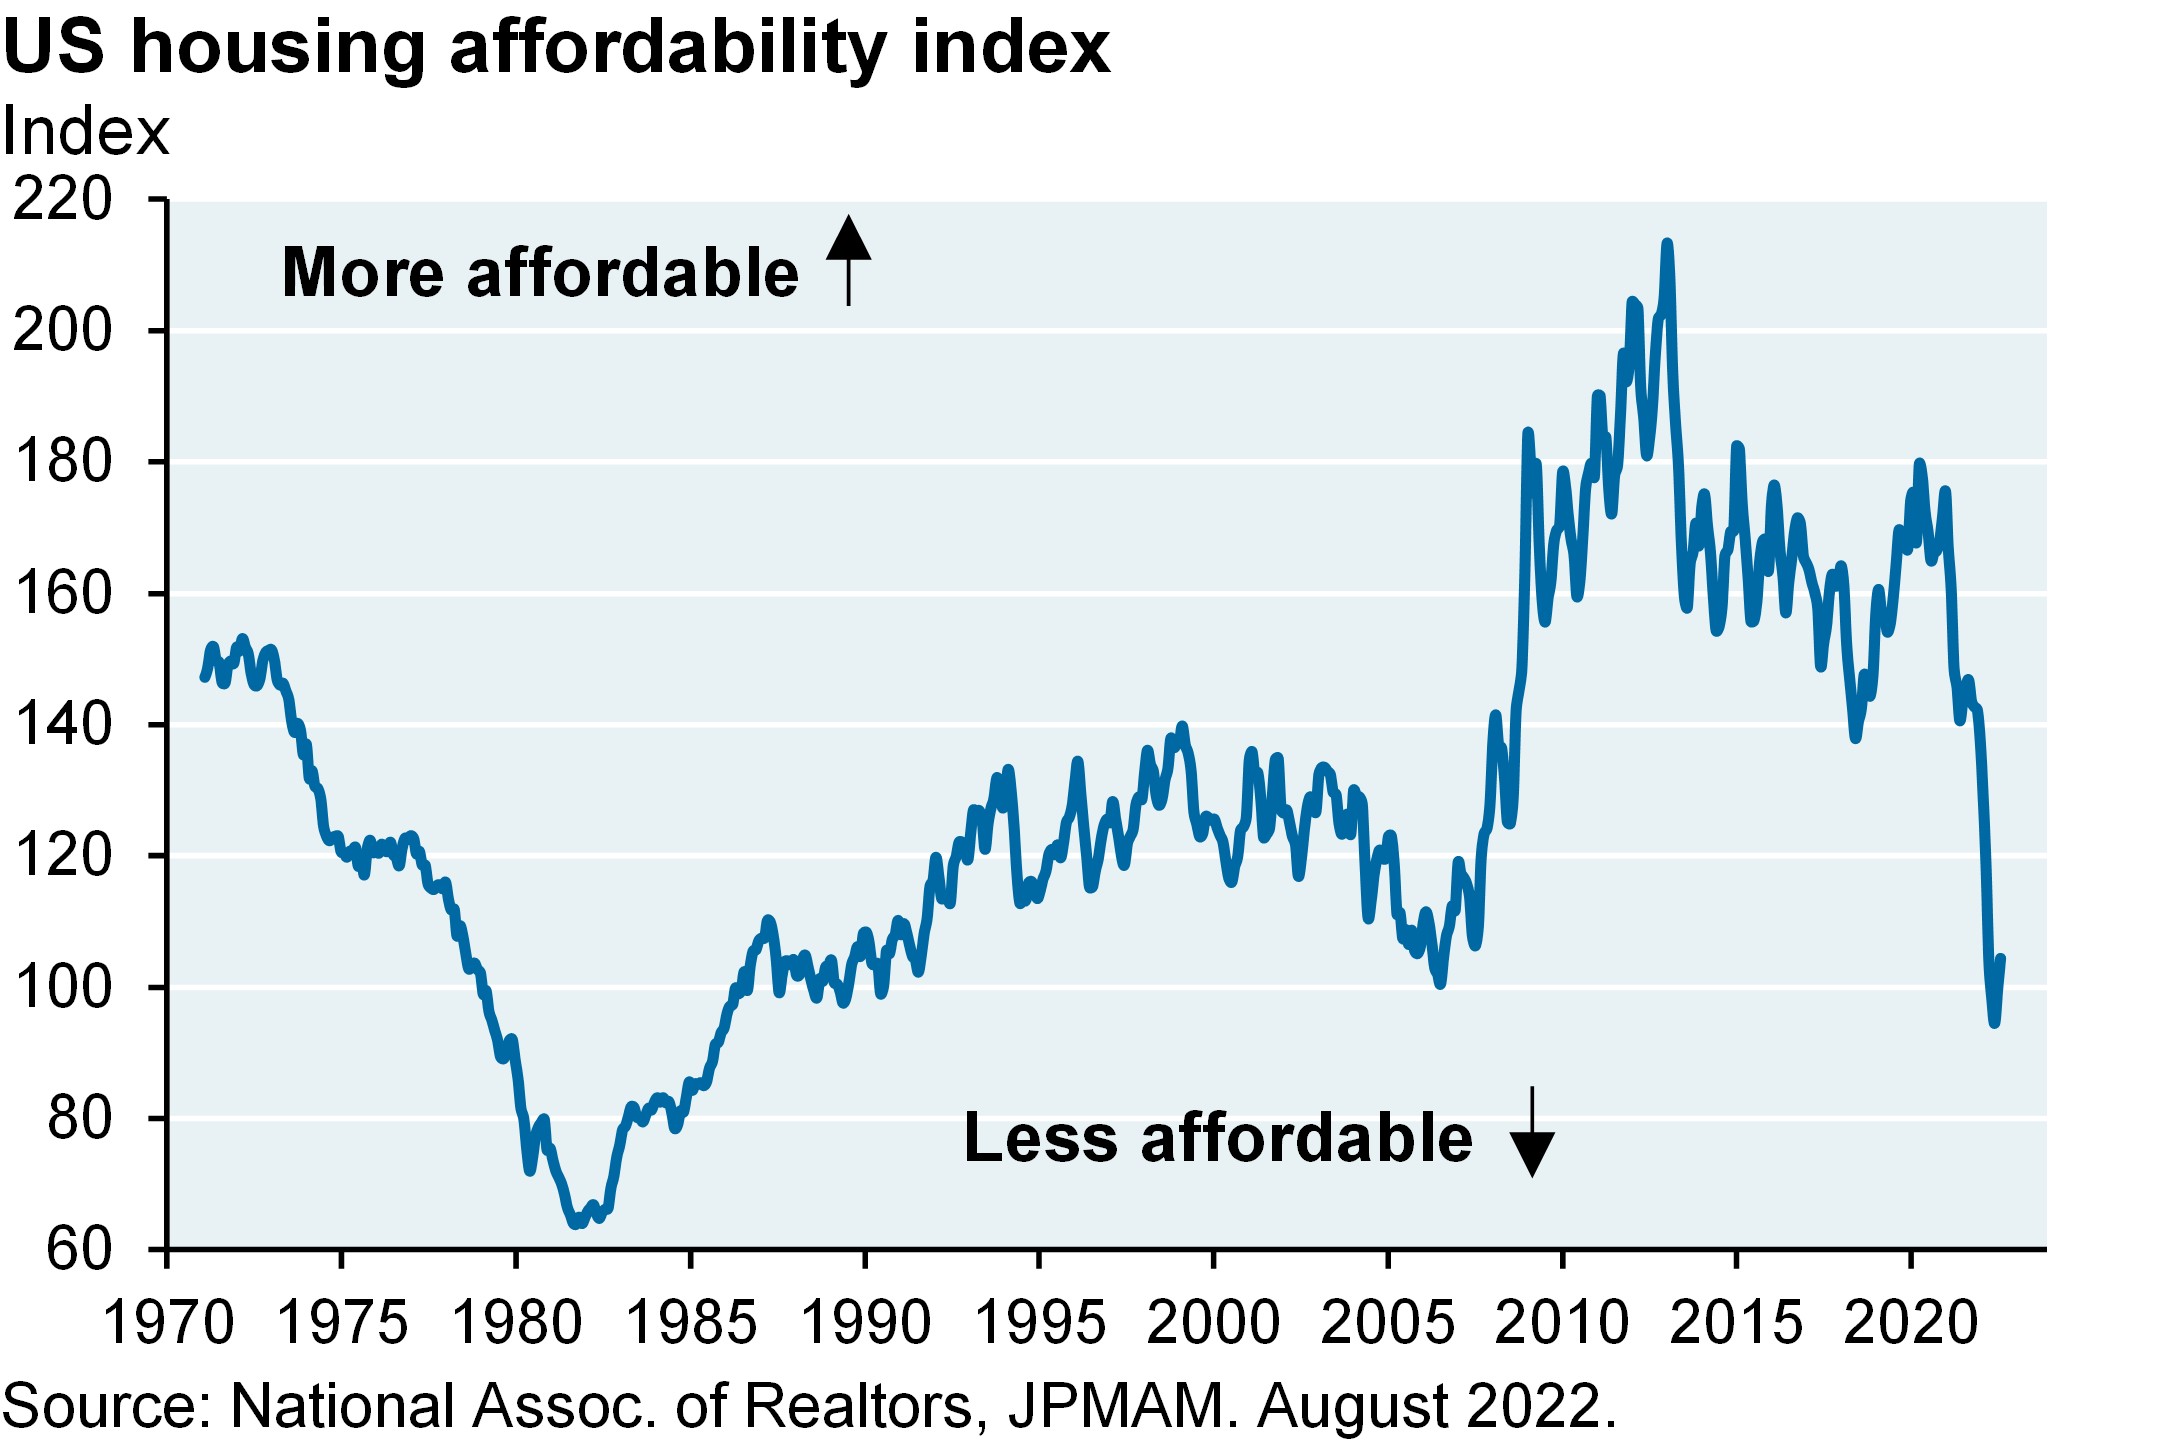 Line chart plots the US housing affordability index from 1970 to present. The index hovered around 160-180 for most of the 2010s, indicating greater housing affordability. Currently, the index has dipped to around 100, which is its lowest affordability since 2007. 